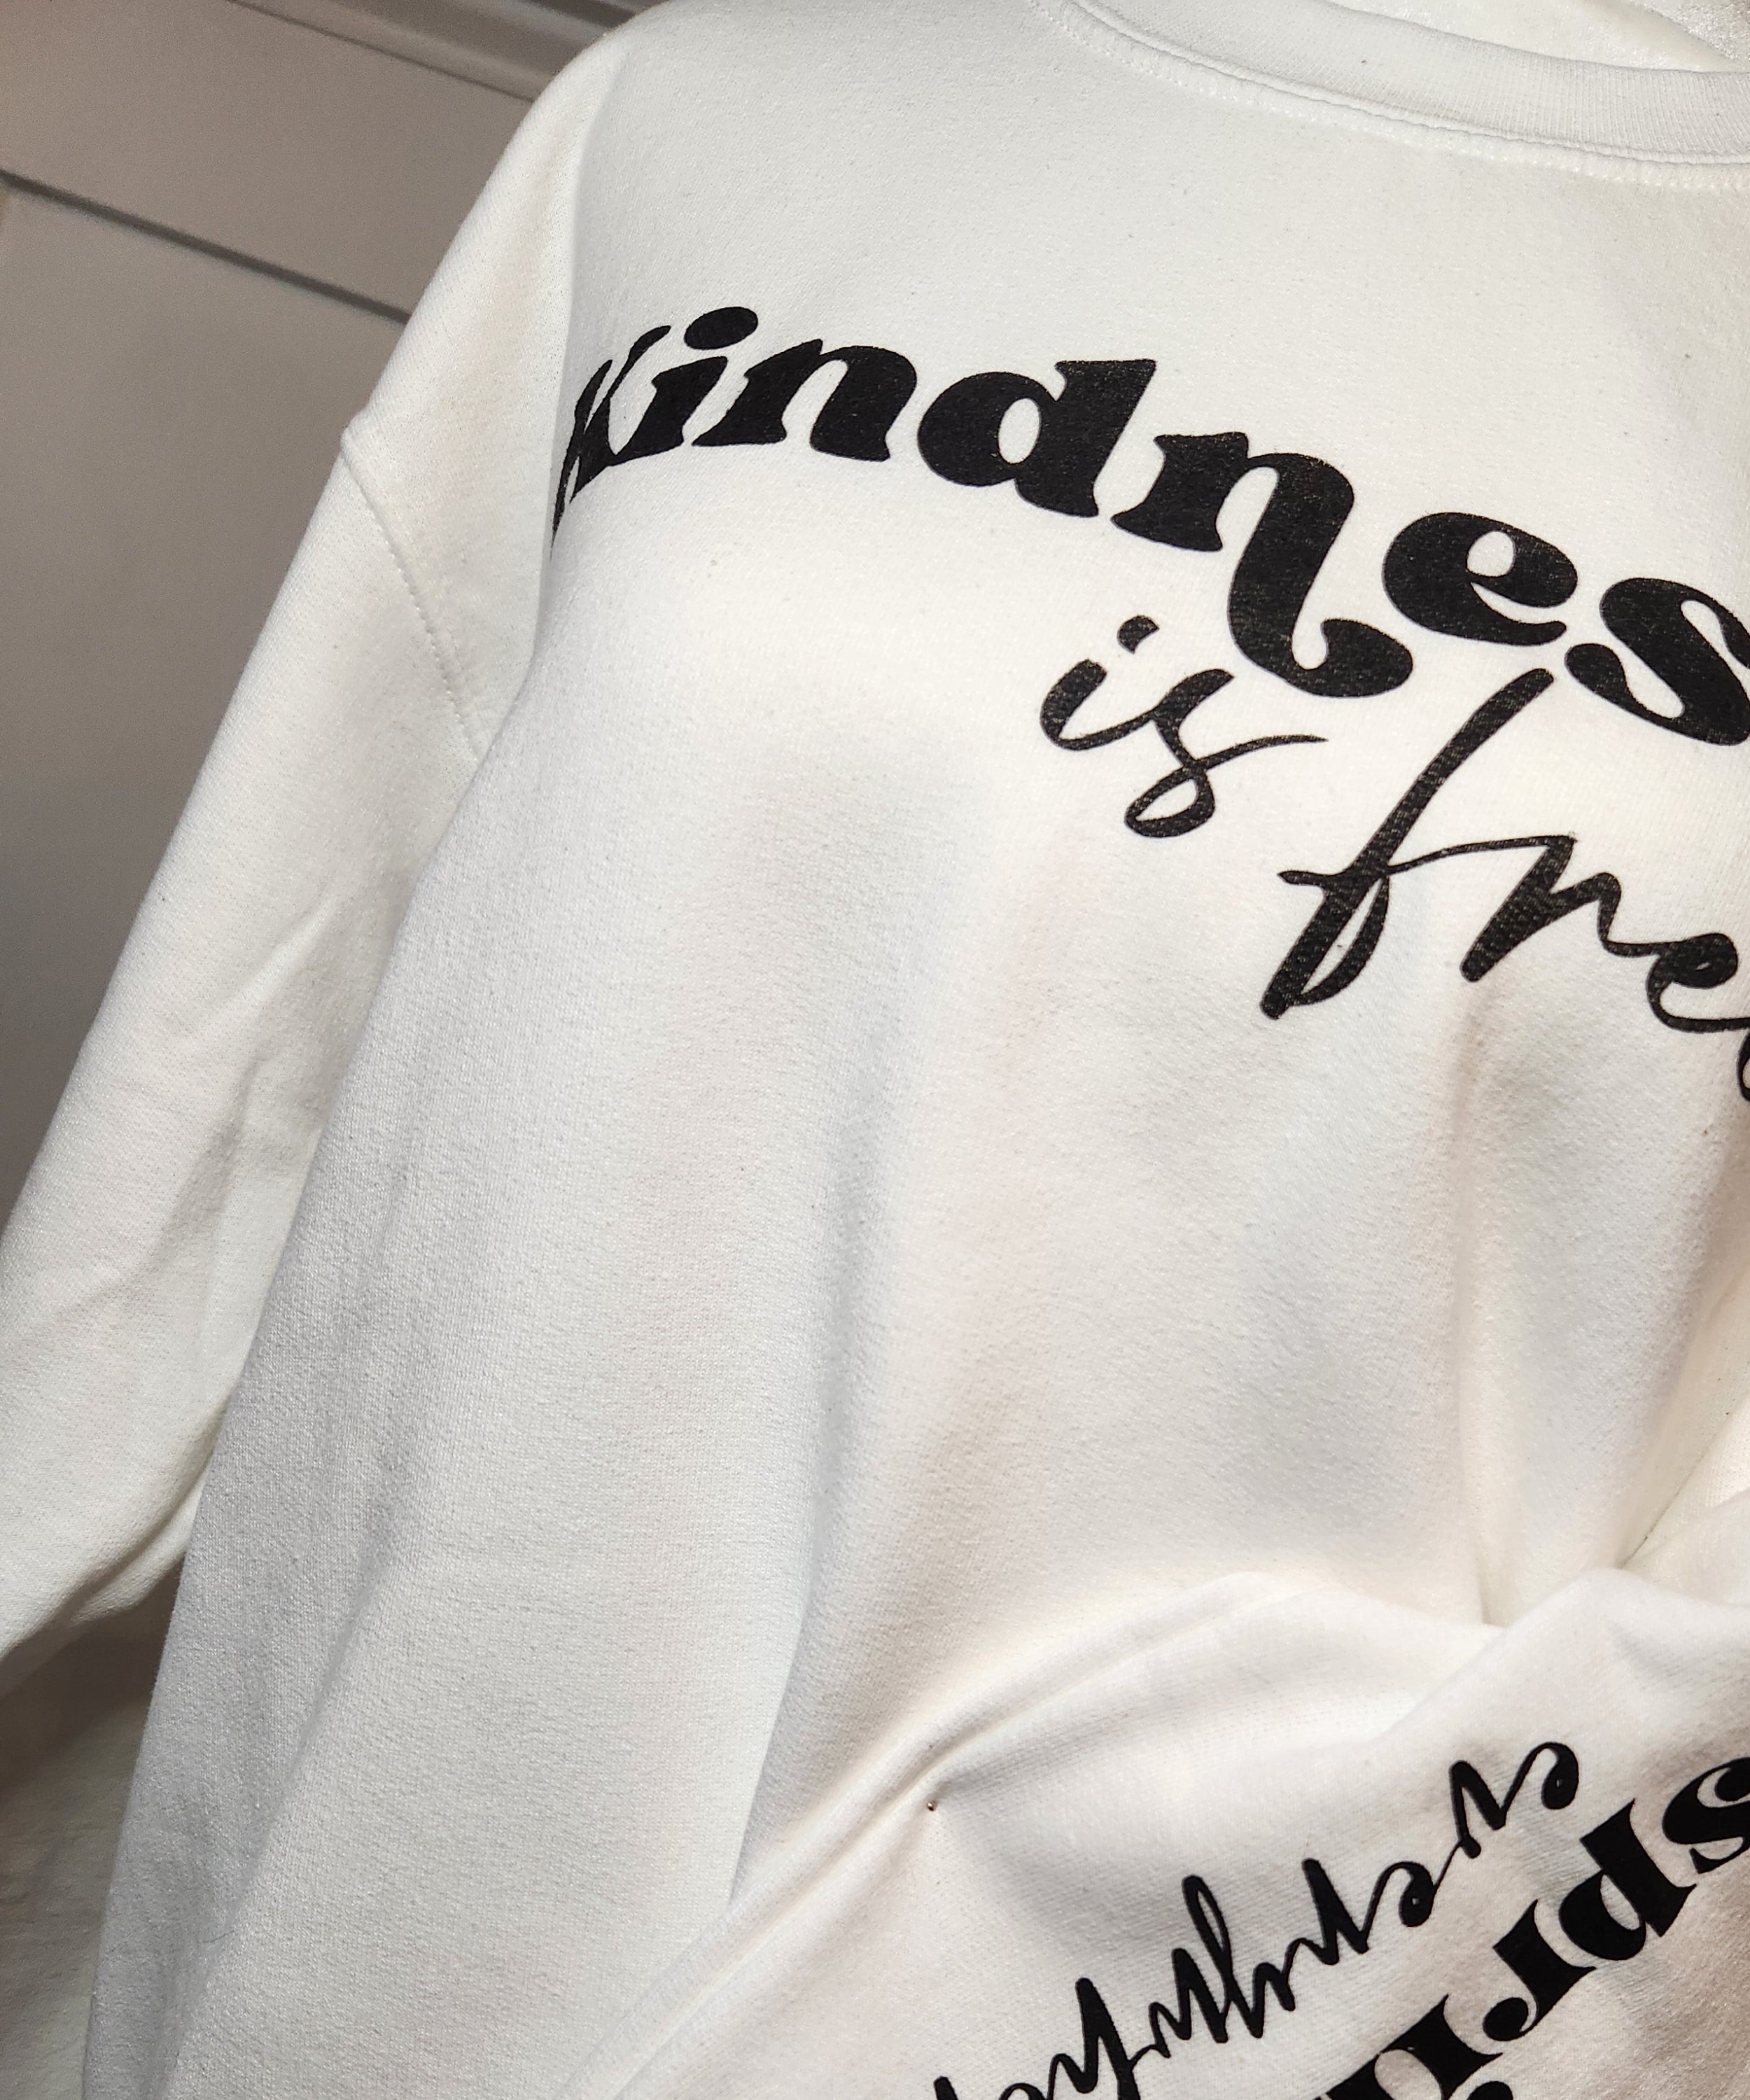 Kindness is free, Sprinkle it everywhere Sweatshirt - White - Plus/Regular-Apparel-LouisGeorge Boutique-LouisGeorge Boutique, Women’s Fashion Boutique Located in Trussville, Alabama